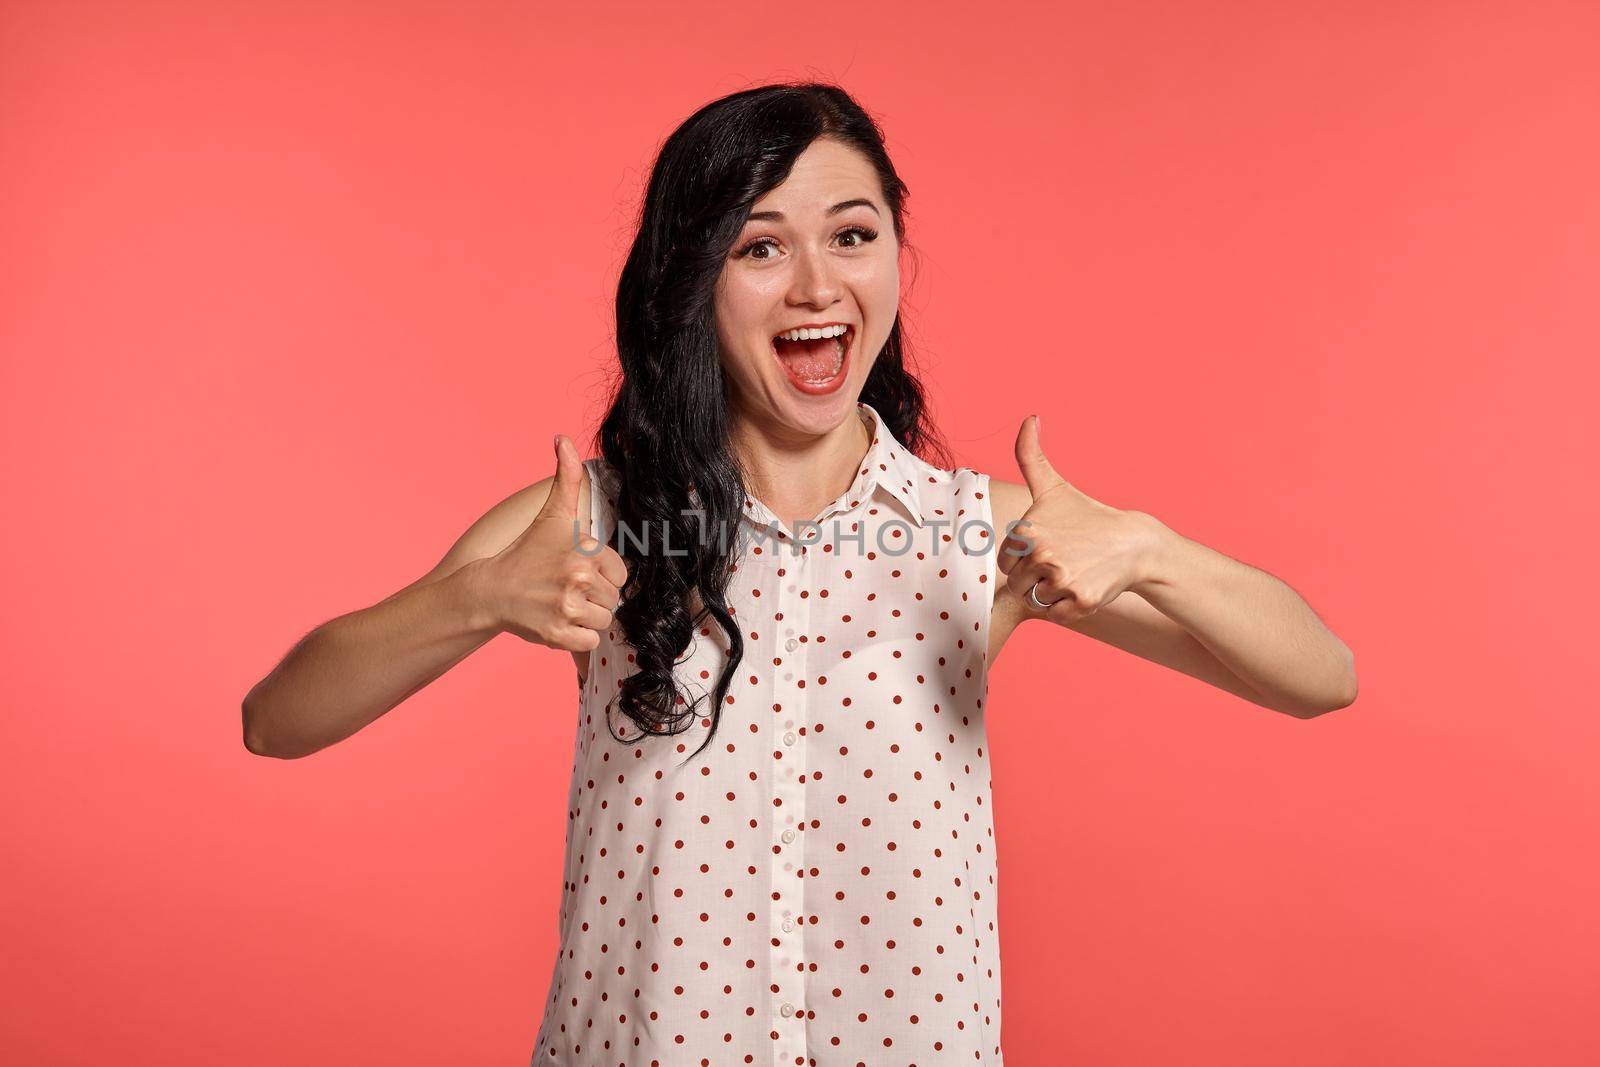 Studio shot of an amazing teen lady wearing casual white polka dot blouse. Little brunette female is showing thumbs up and smiling posing over a pink background. People and sincere emotions.